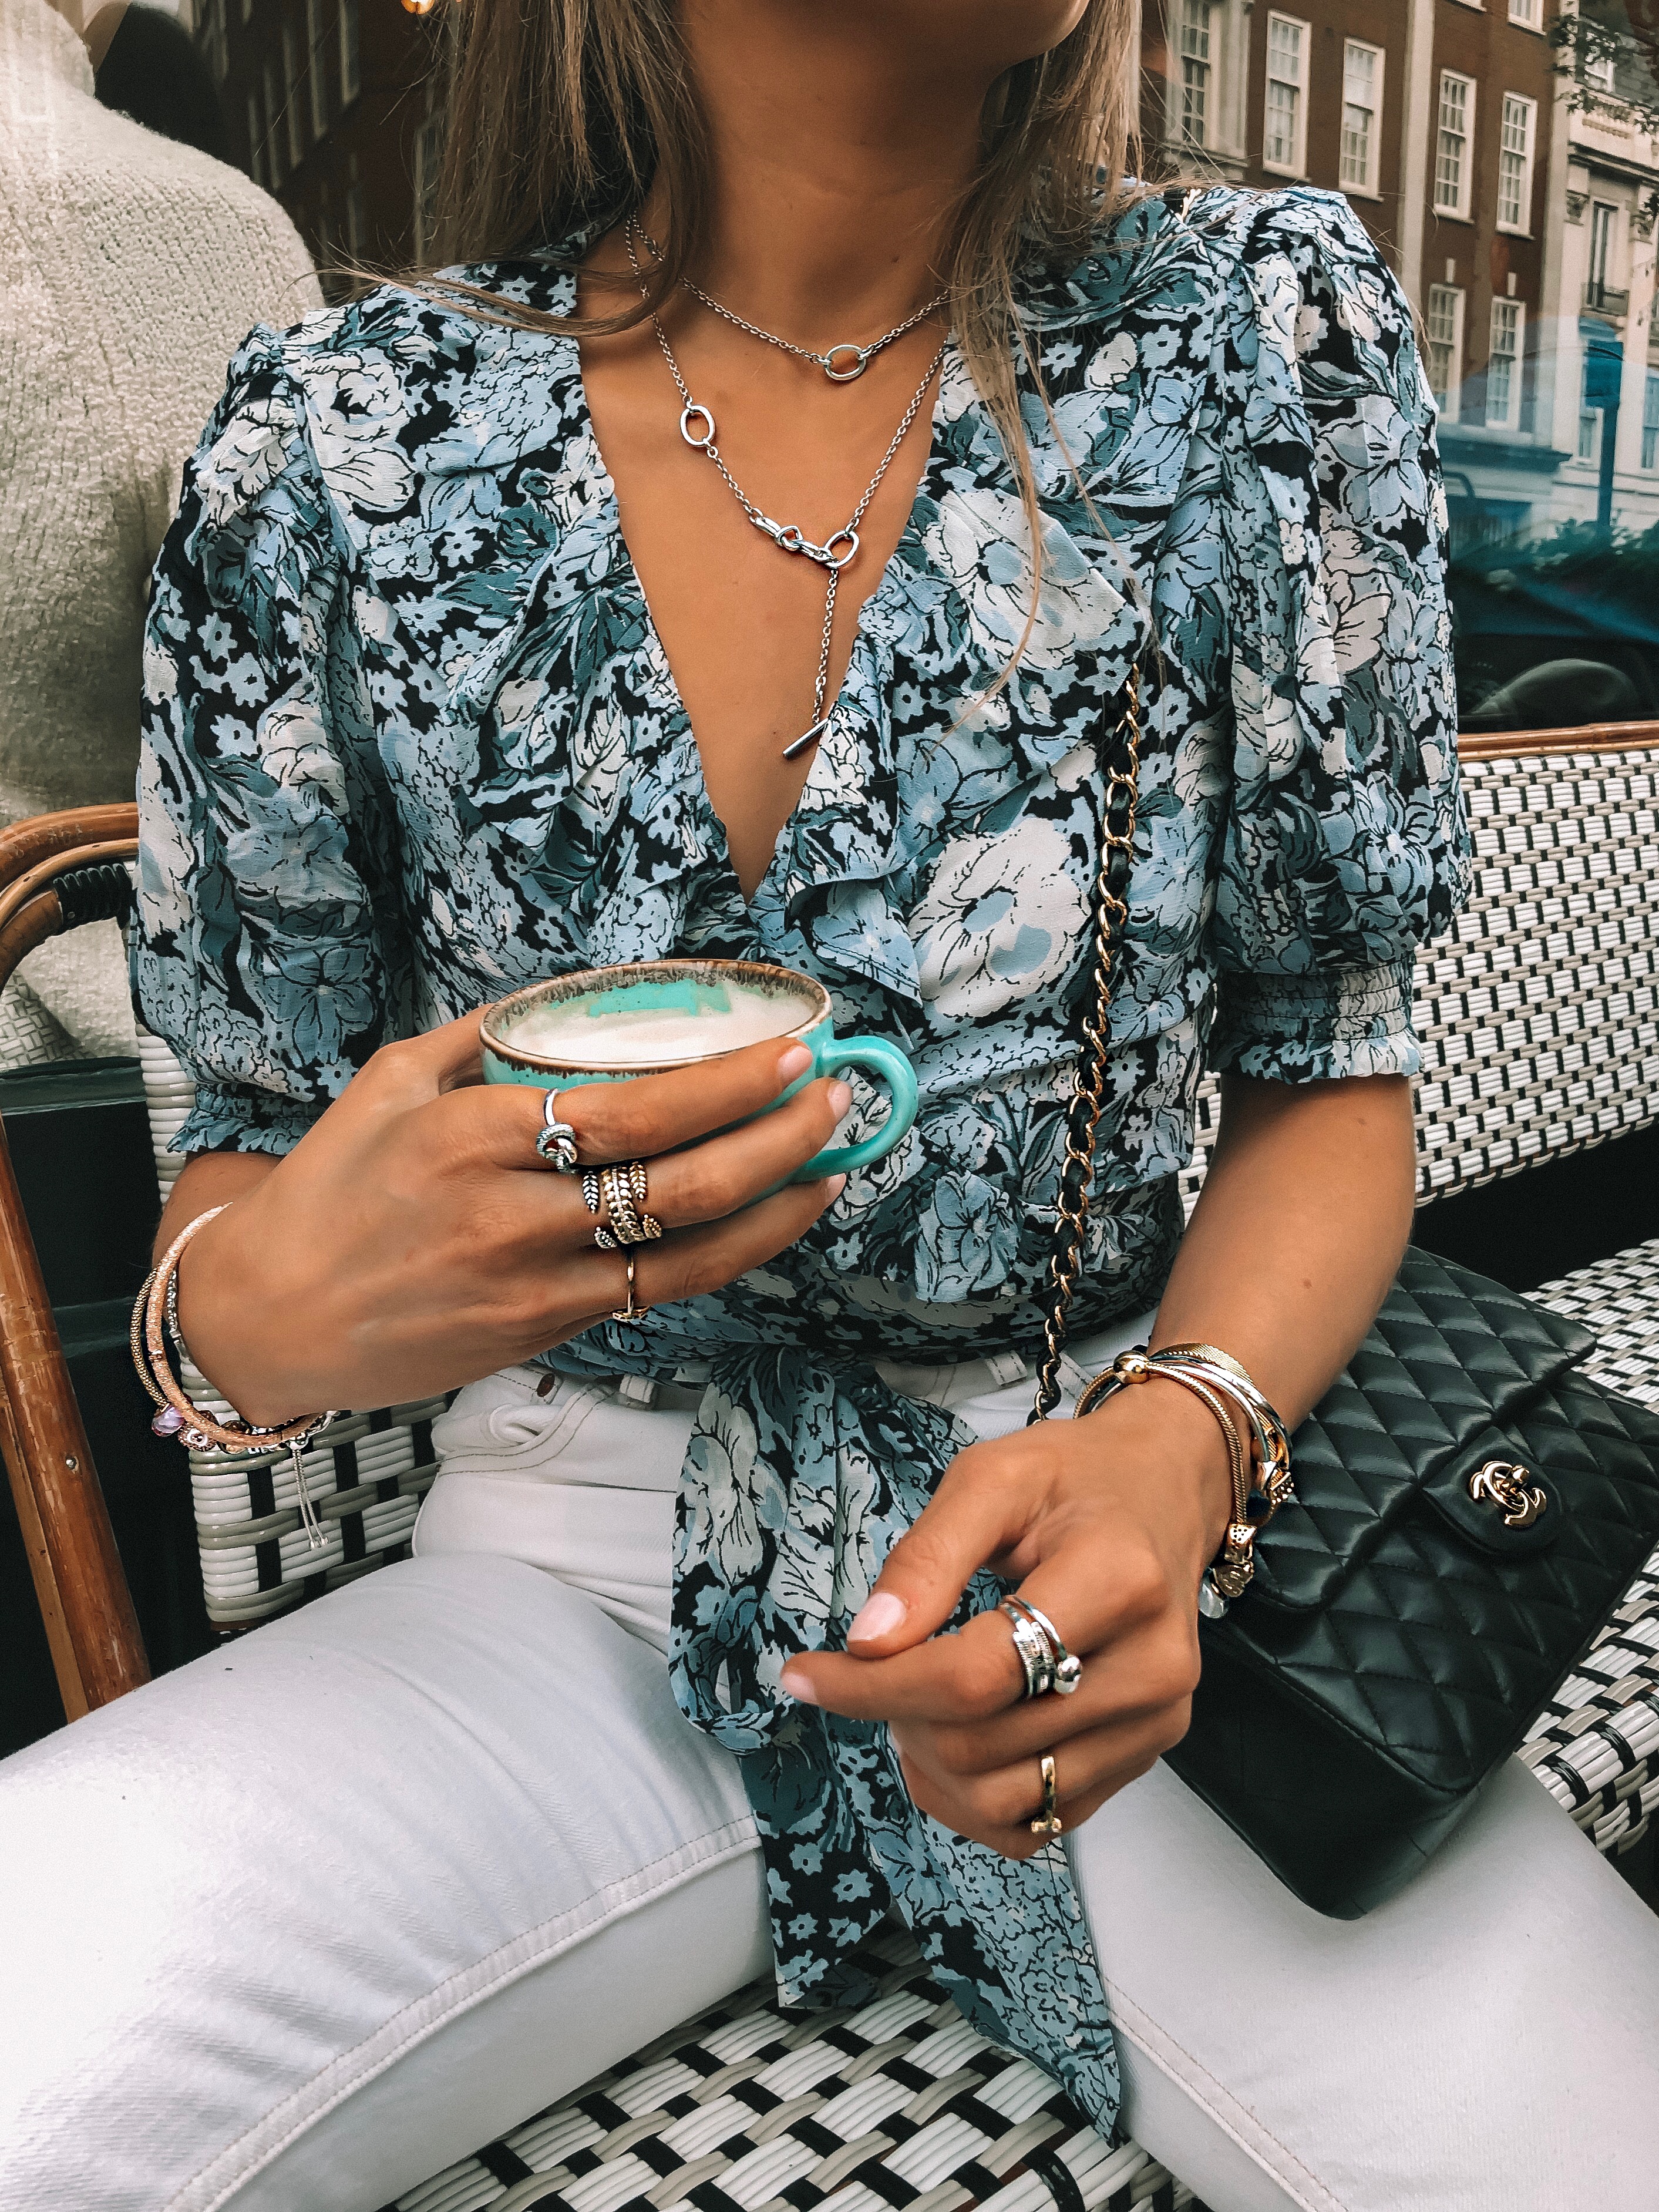 Pandora Ring Stack for Summer in London with beautiful blue floral Ganni Wrap Top - Amazing Pandora Discount Code - SINEAD15 for 15% off!